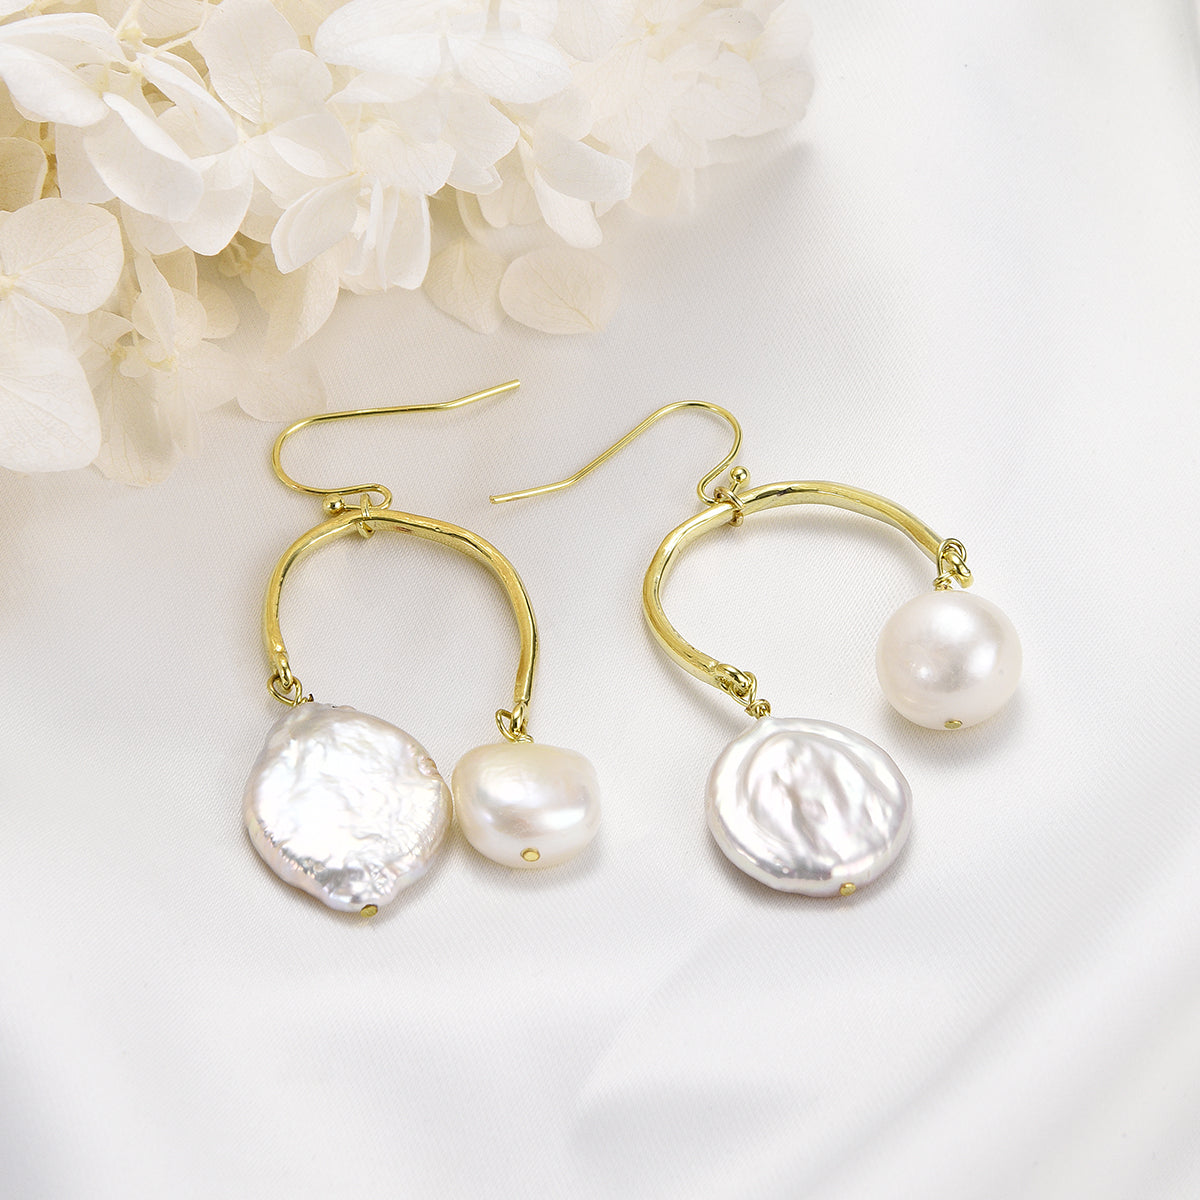 Twinning golden earrings with white pearls